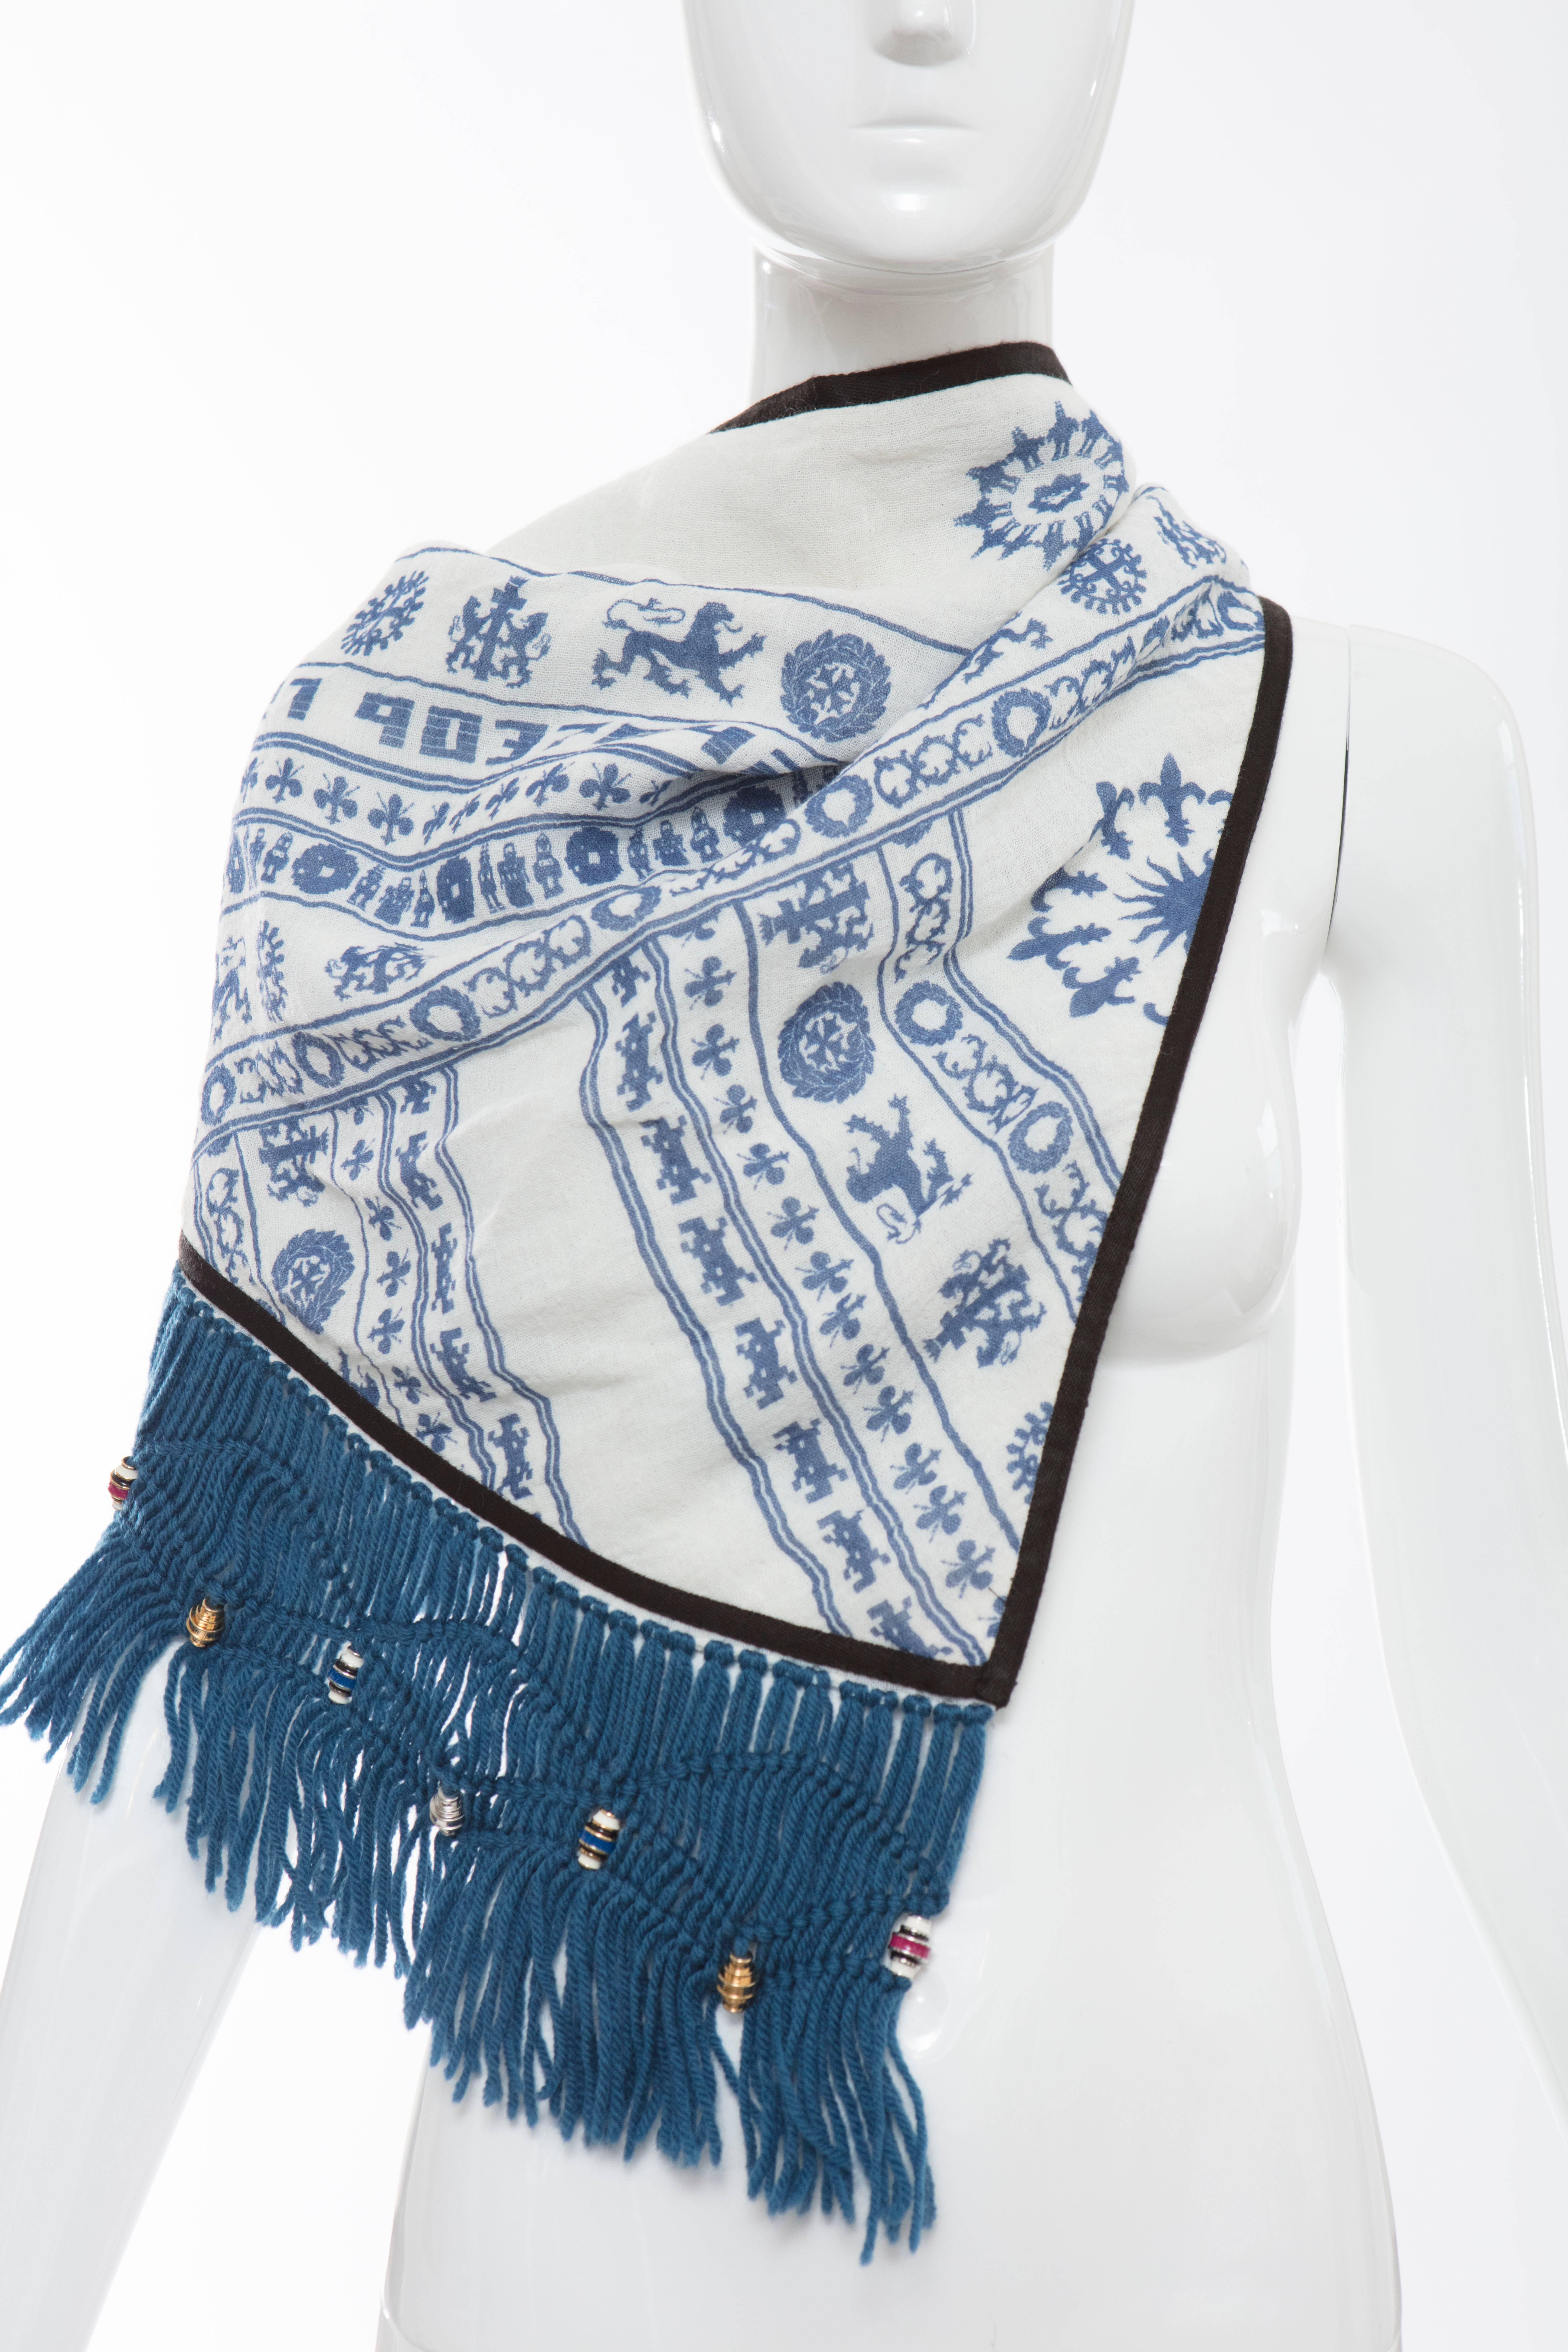 Nicolas Ghesquière for Balenciaga, Autumn-Winter 2007 Keffiyeh cream blue linen cotton woven triangle scarf with abstract pattern throughout and fringe trim featuring enamel bead embellishments.

Length: 42, Width 22

Fabric: 67% Rayon, 22% Linen,